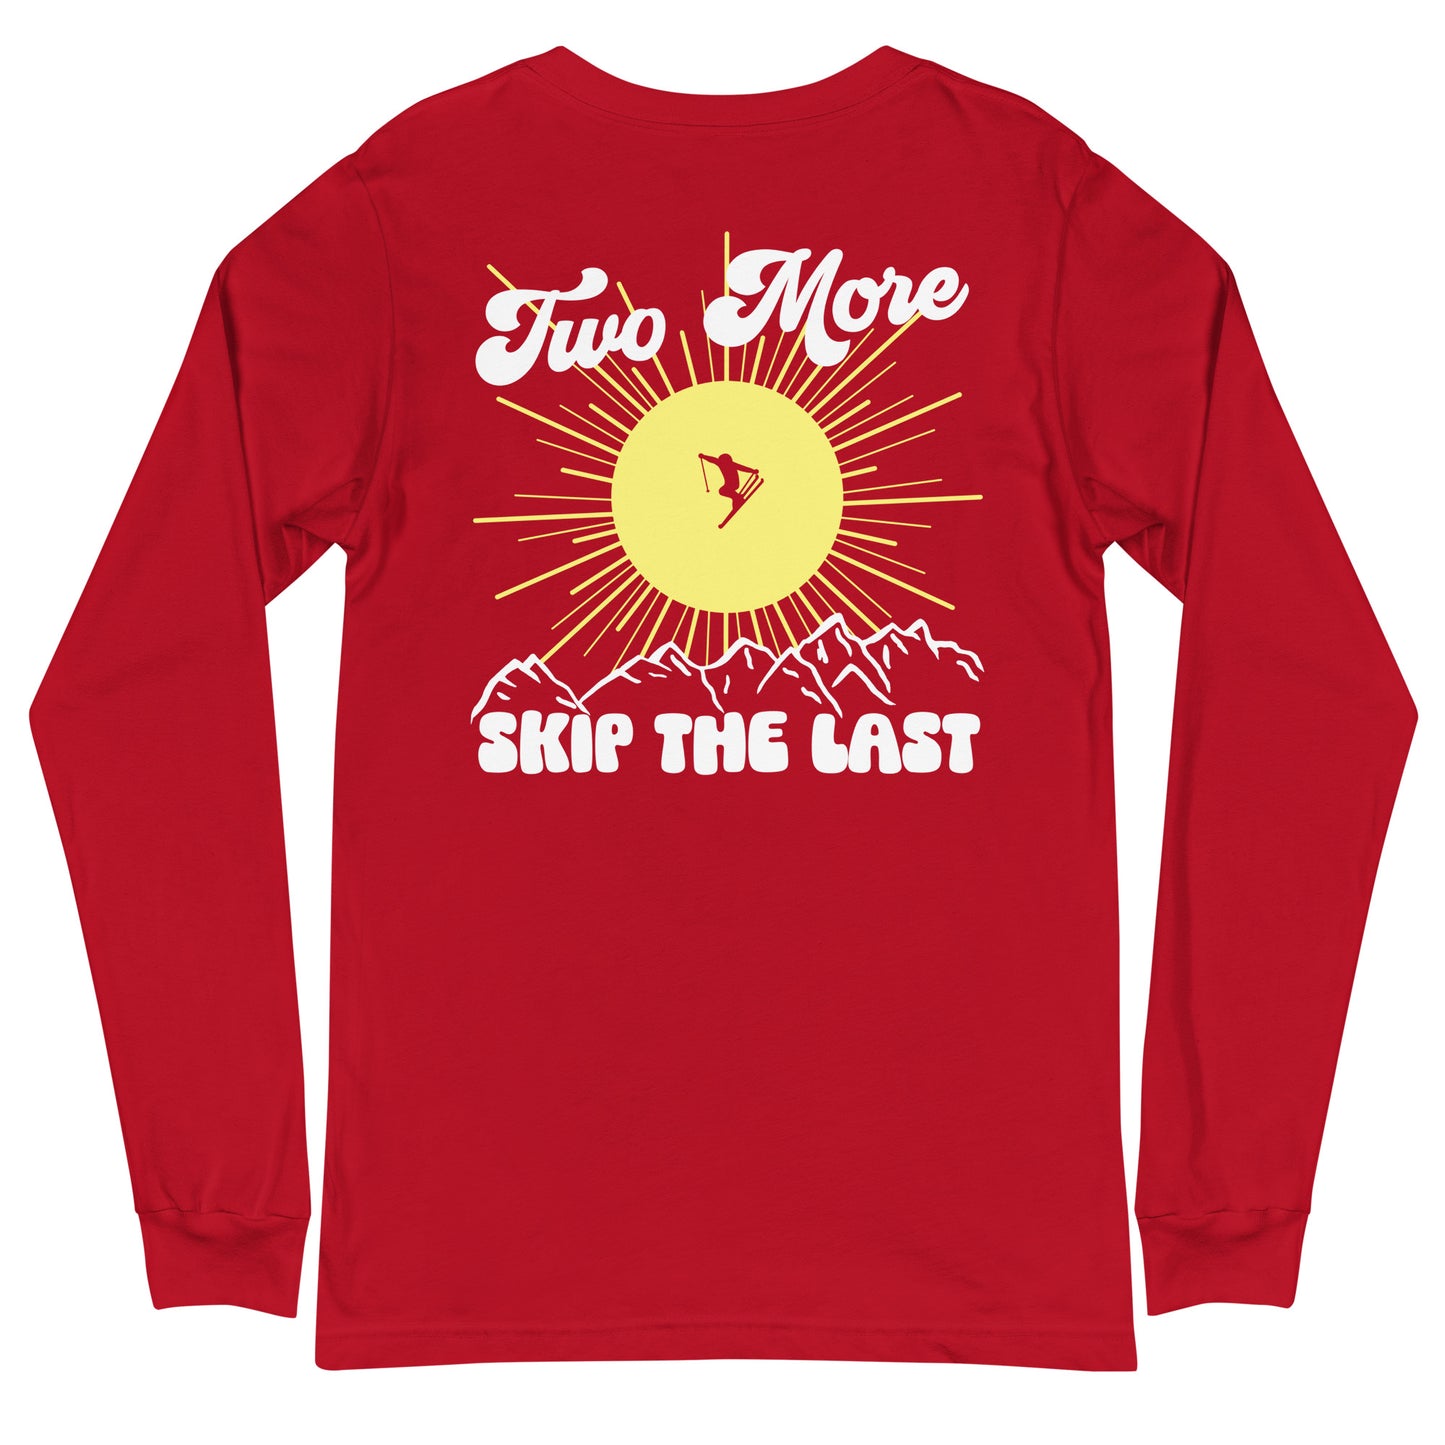 Two More Skip The Last "Bluebird" red unisex Long sleeve t-shirt. Back view